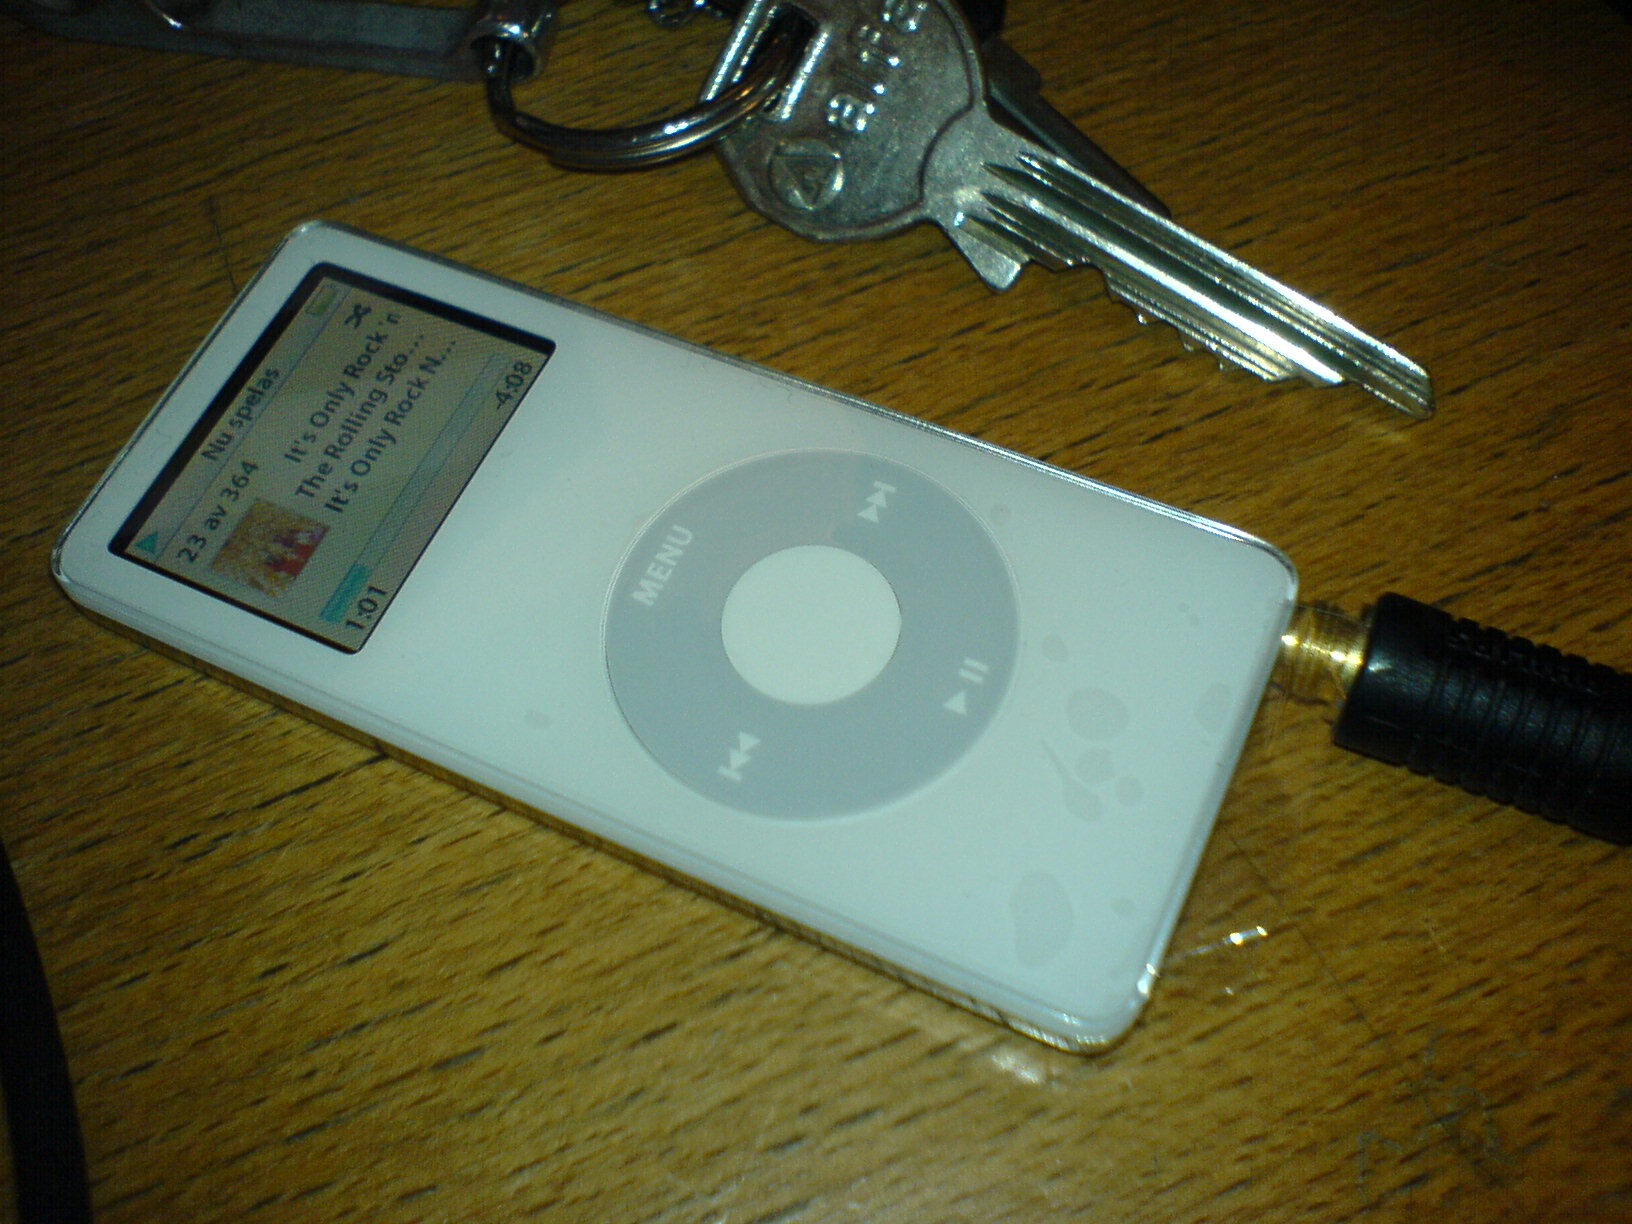 an ipod sits on a table with a keyshelf behind it